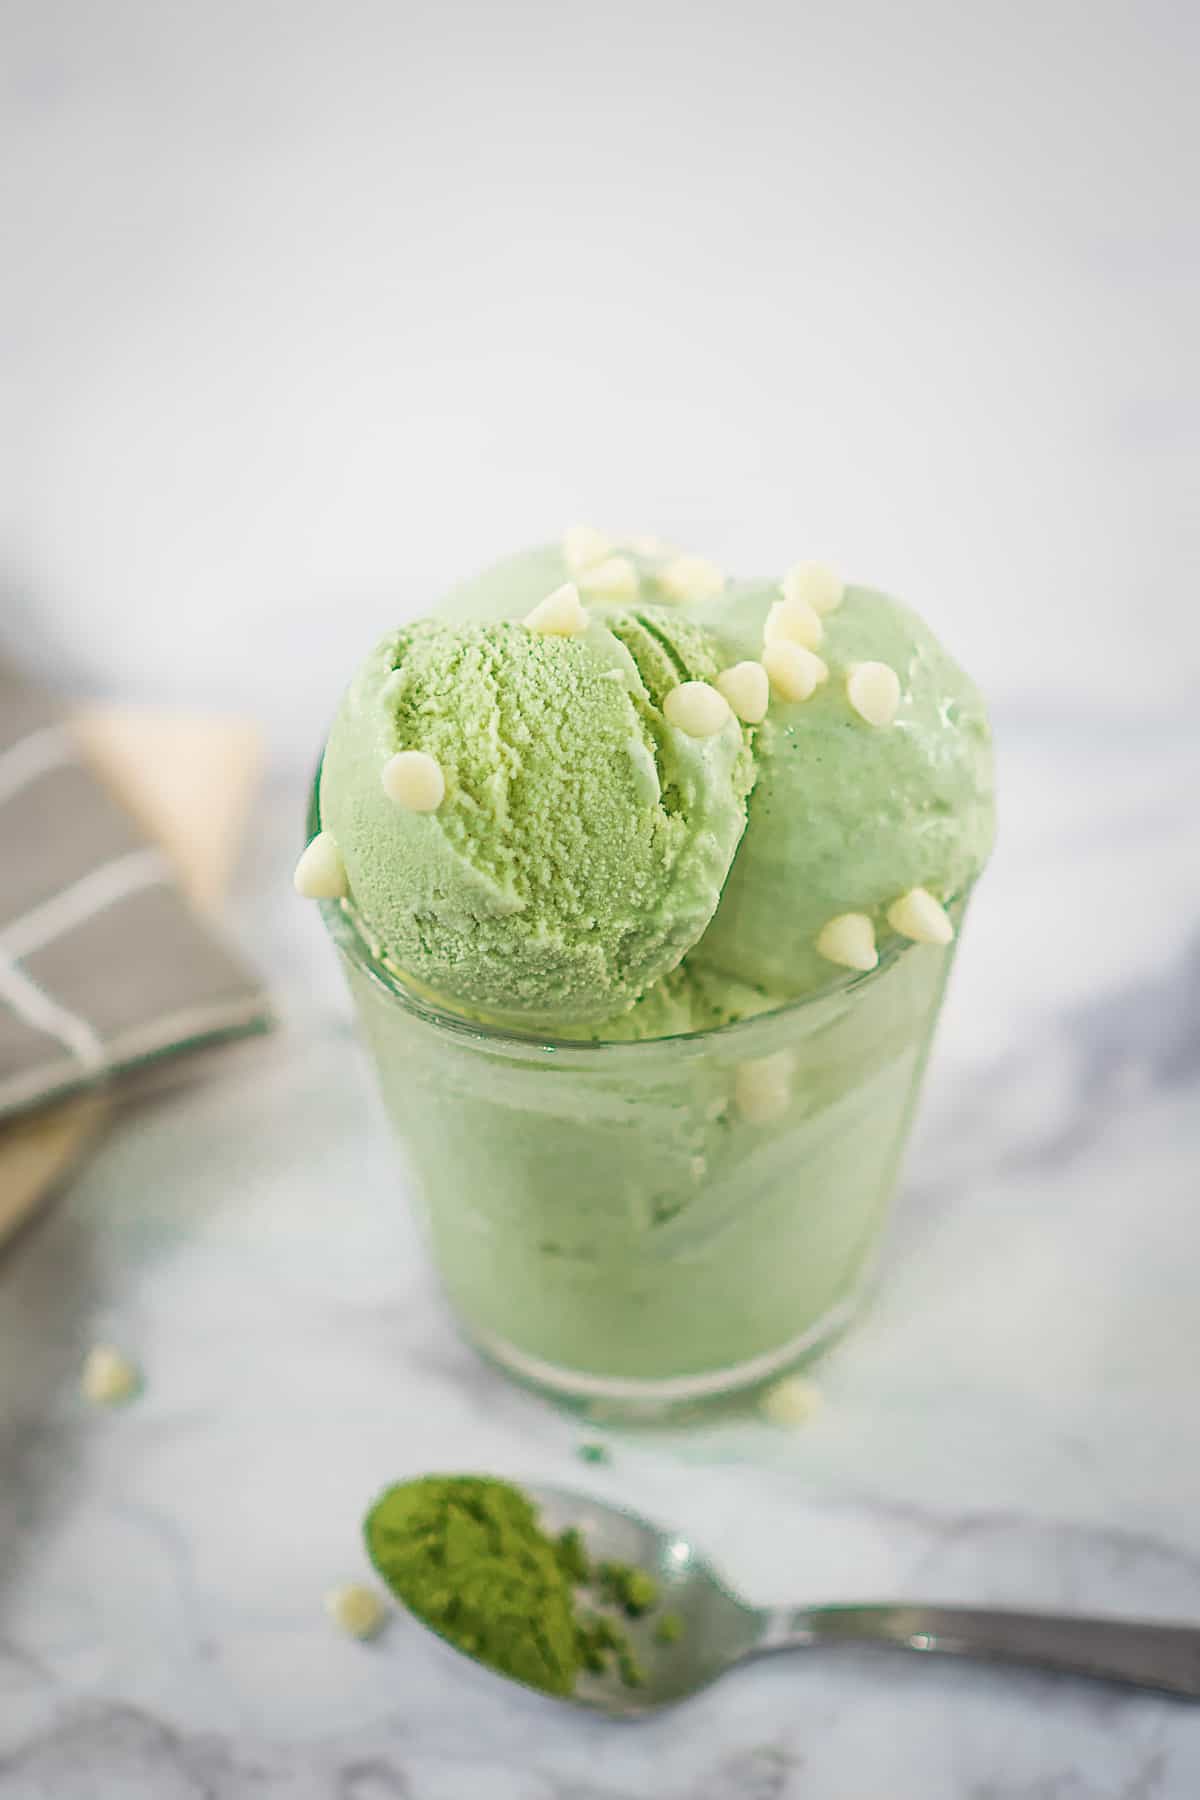 A small glass of green ice cream with while chocolate chips.